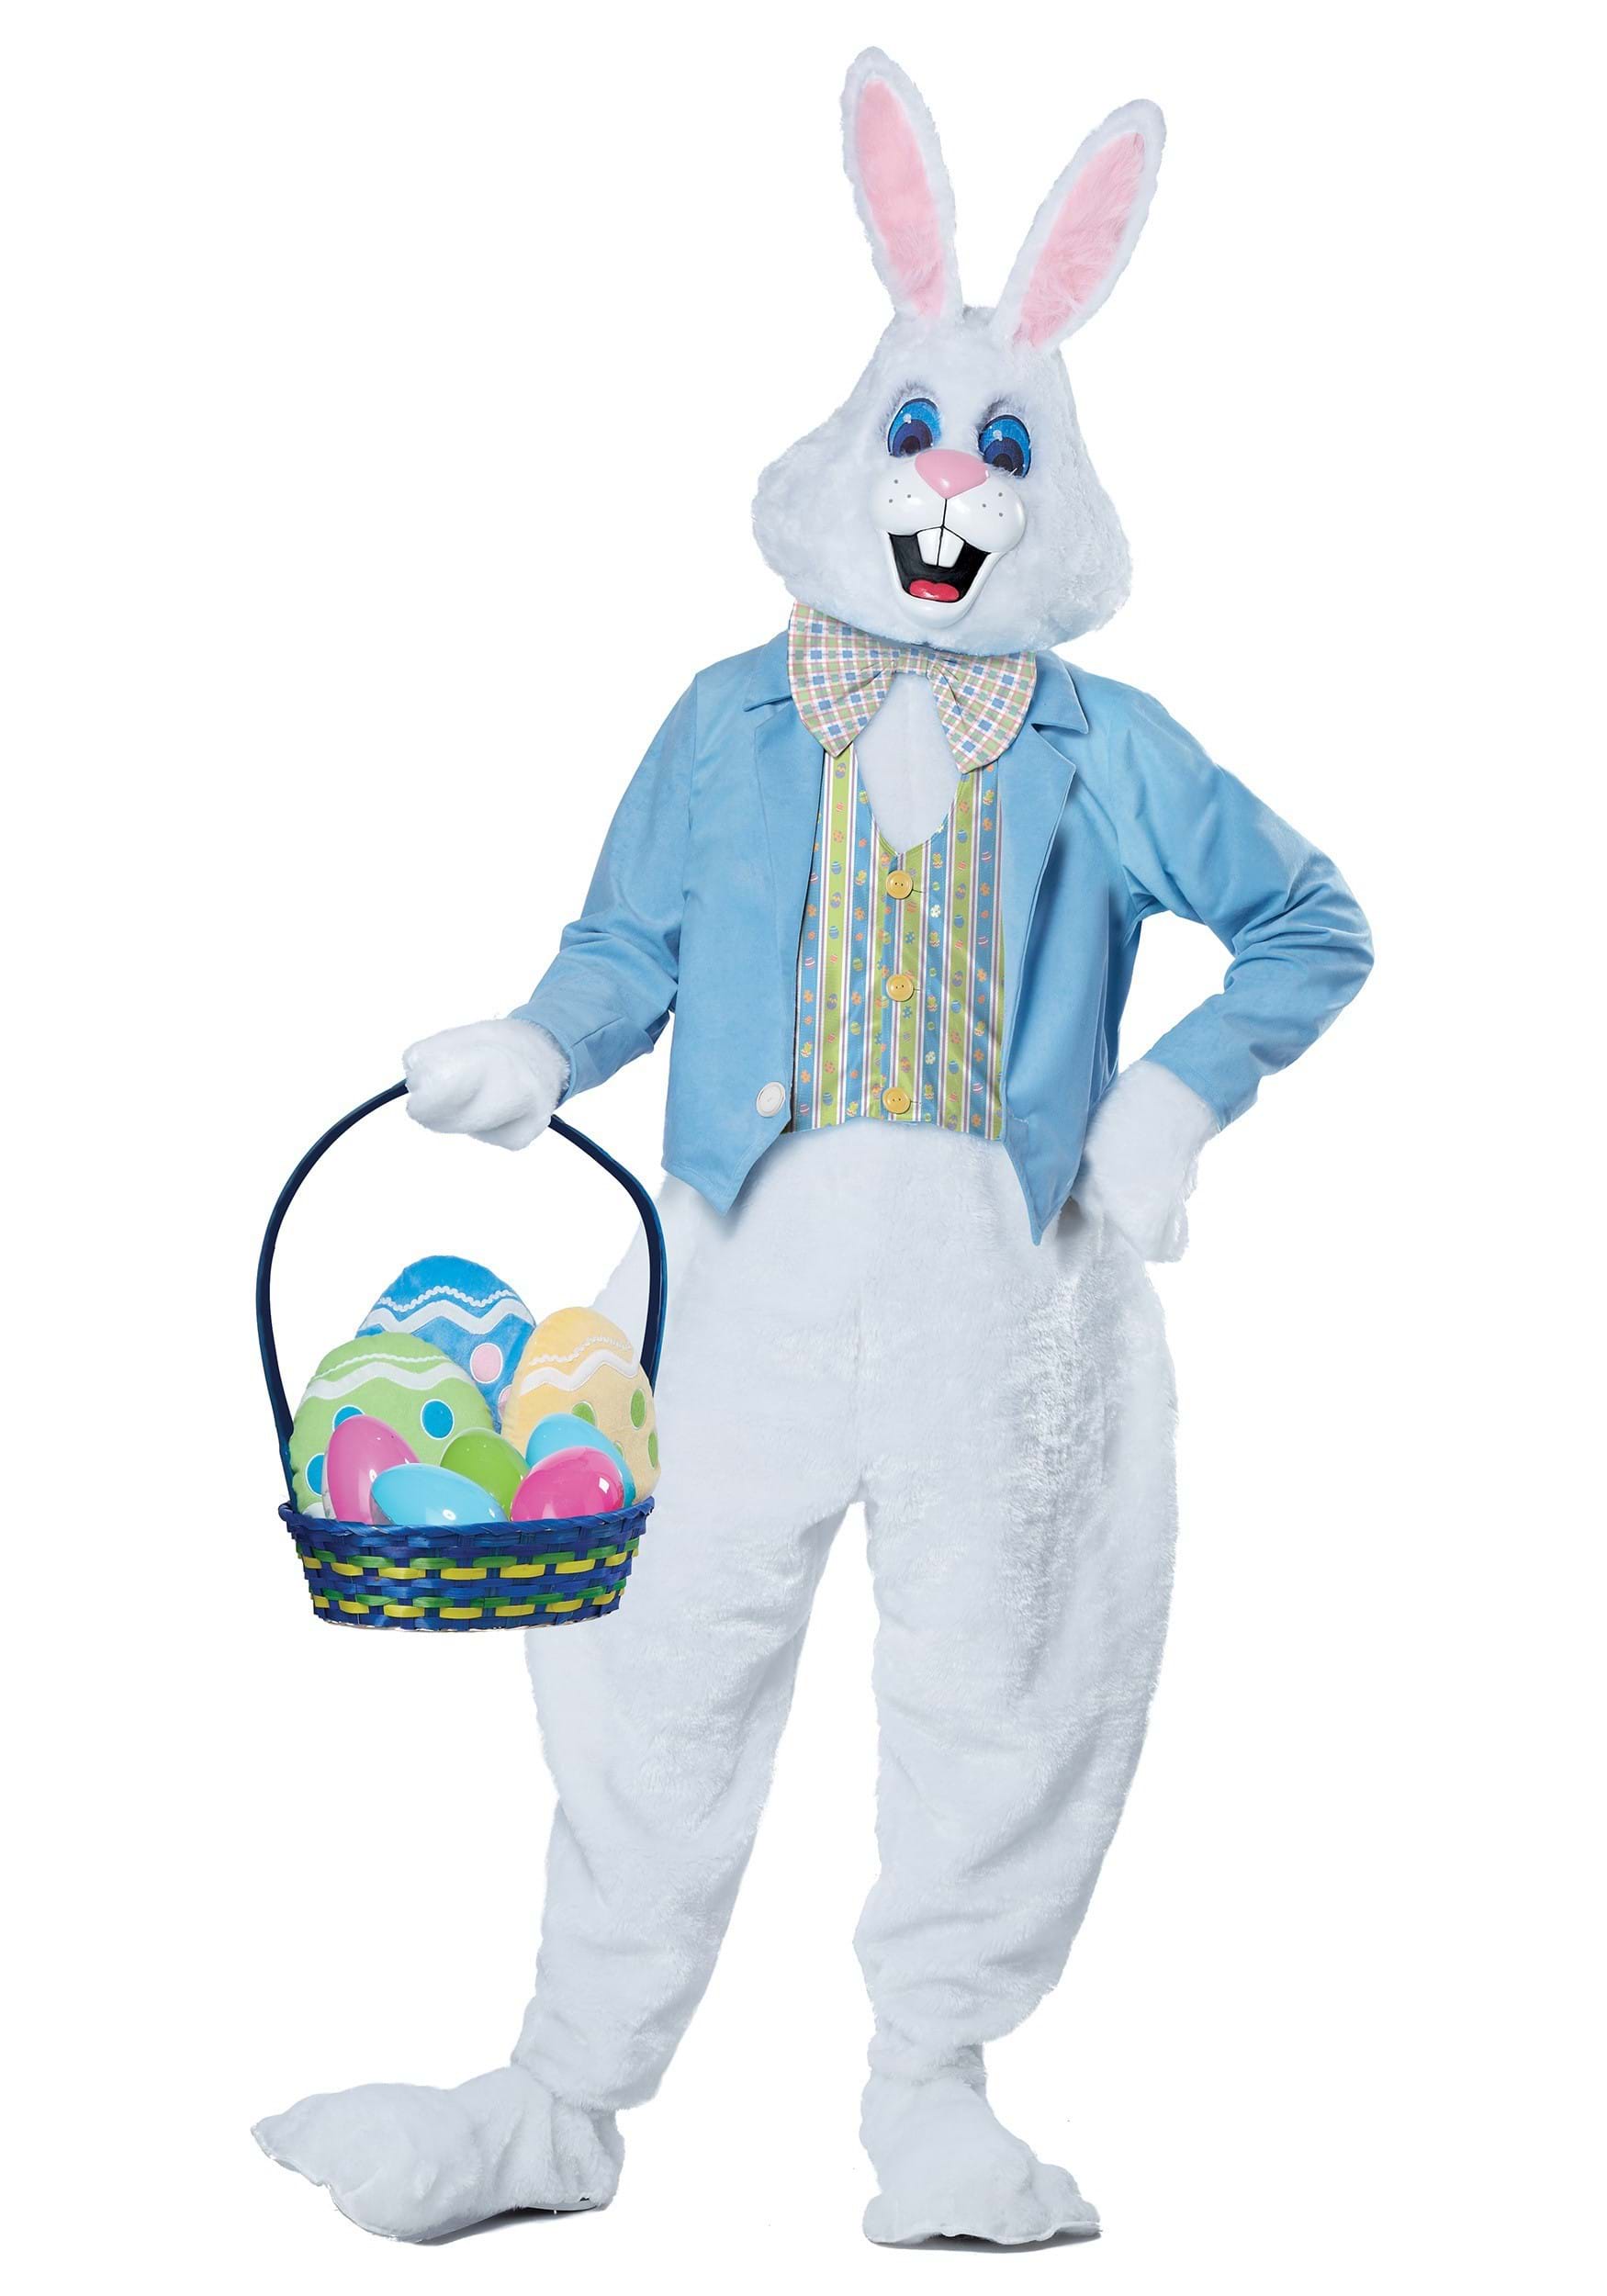 Photos - Fancy Dress California Costume Collection Deluxe Easter Bunny Costume Blue/White C 